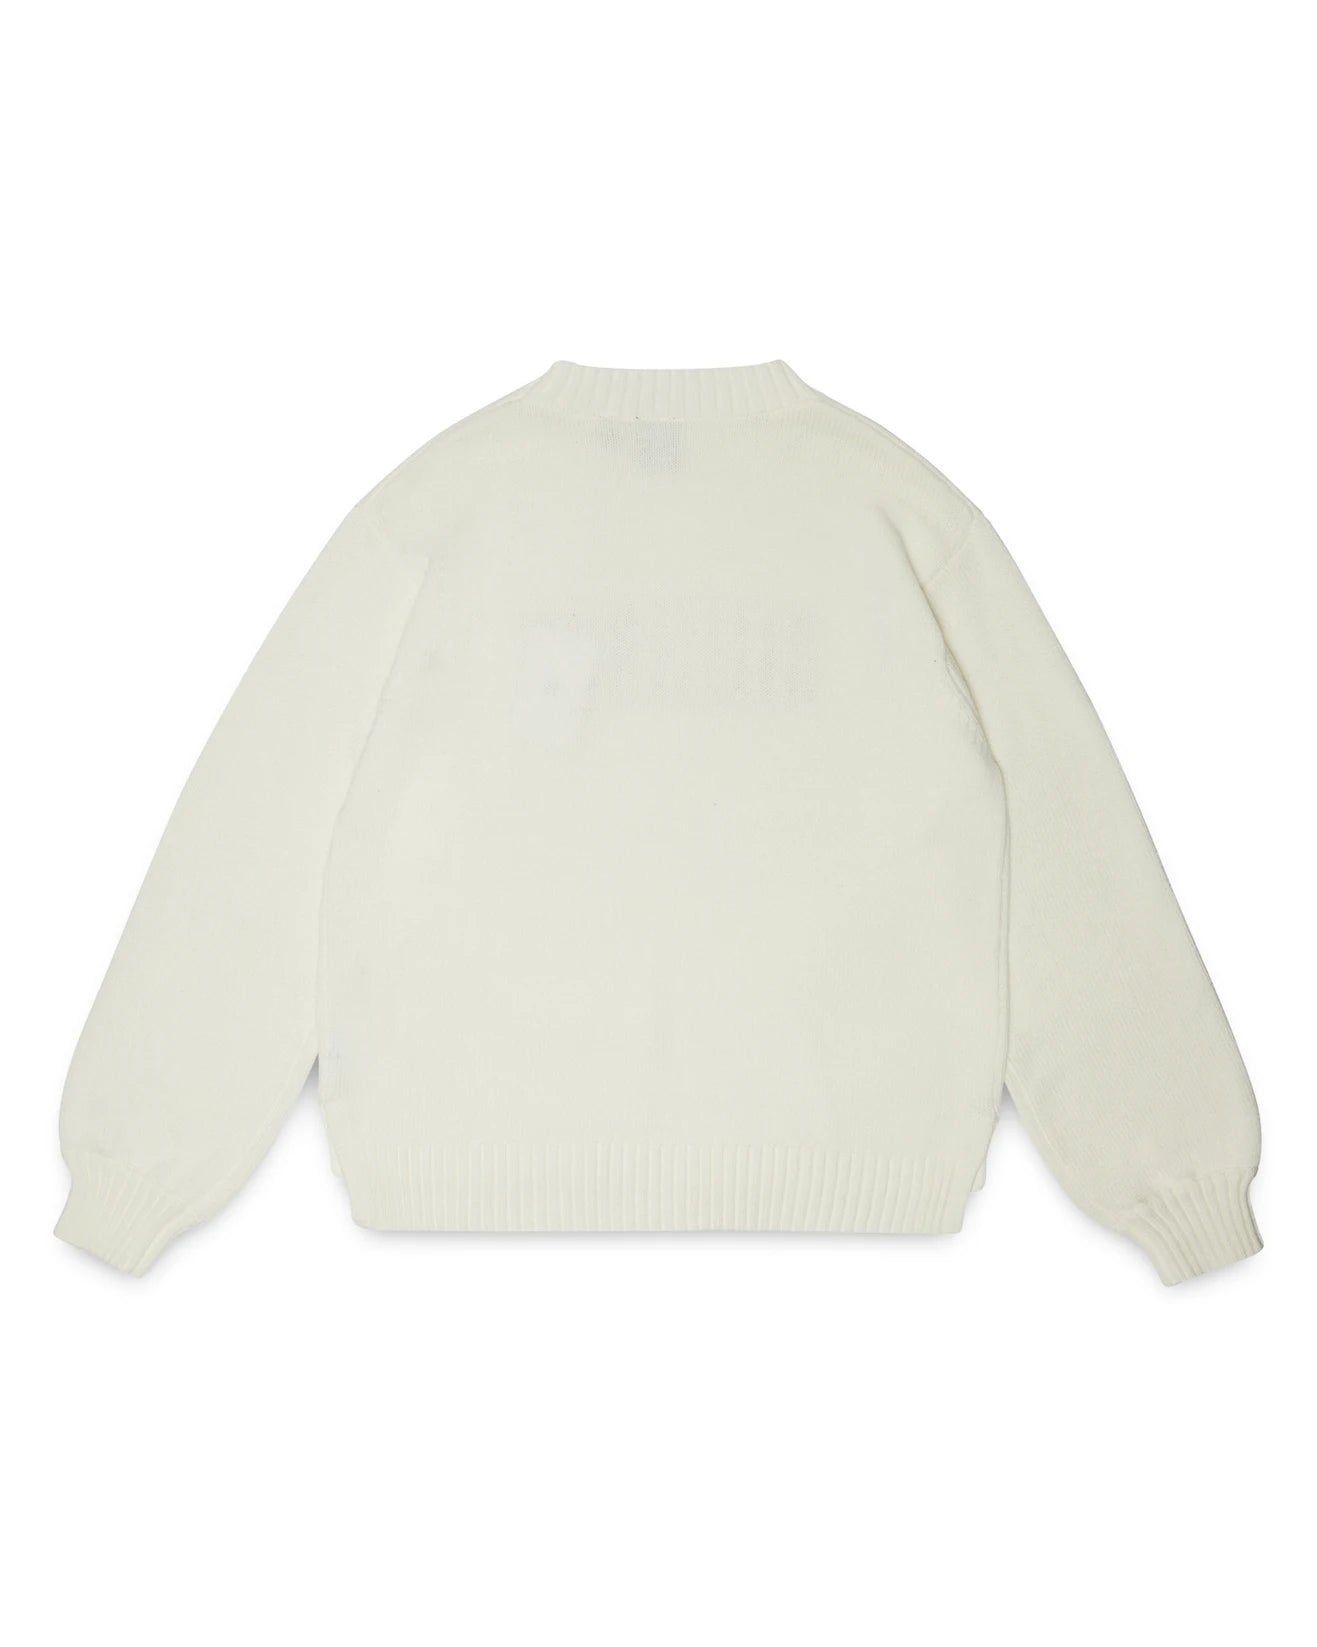 HURLEY HYGGE CREW KNIT